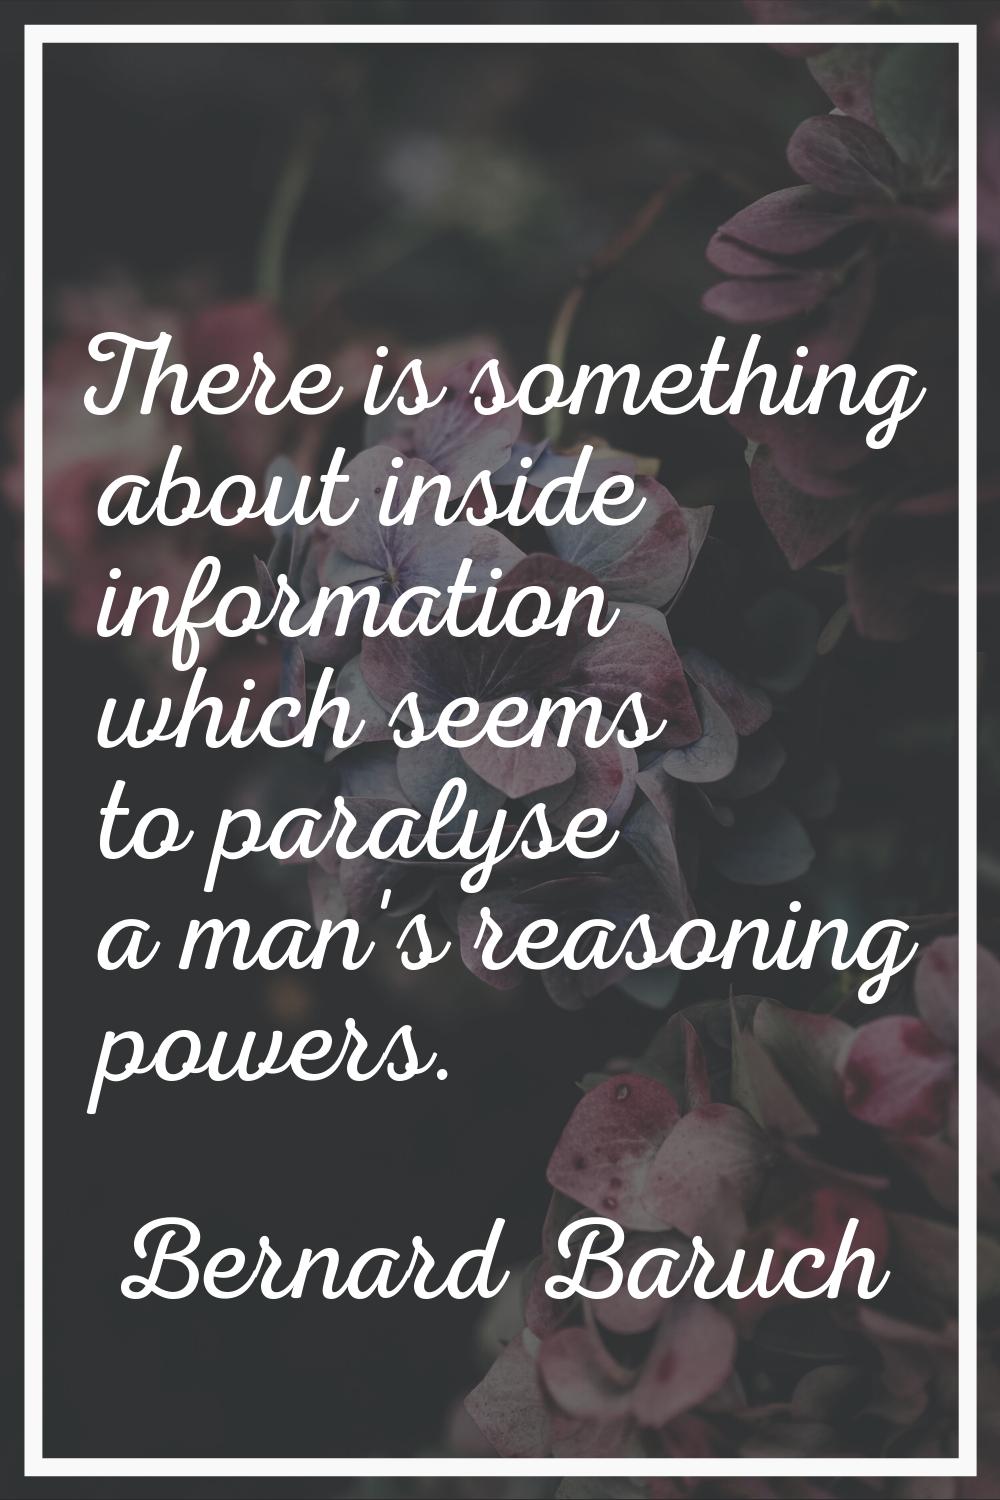 There is something about inside information which seems to paralyse a man's reasoning powers.